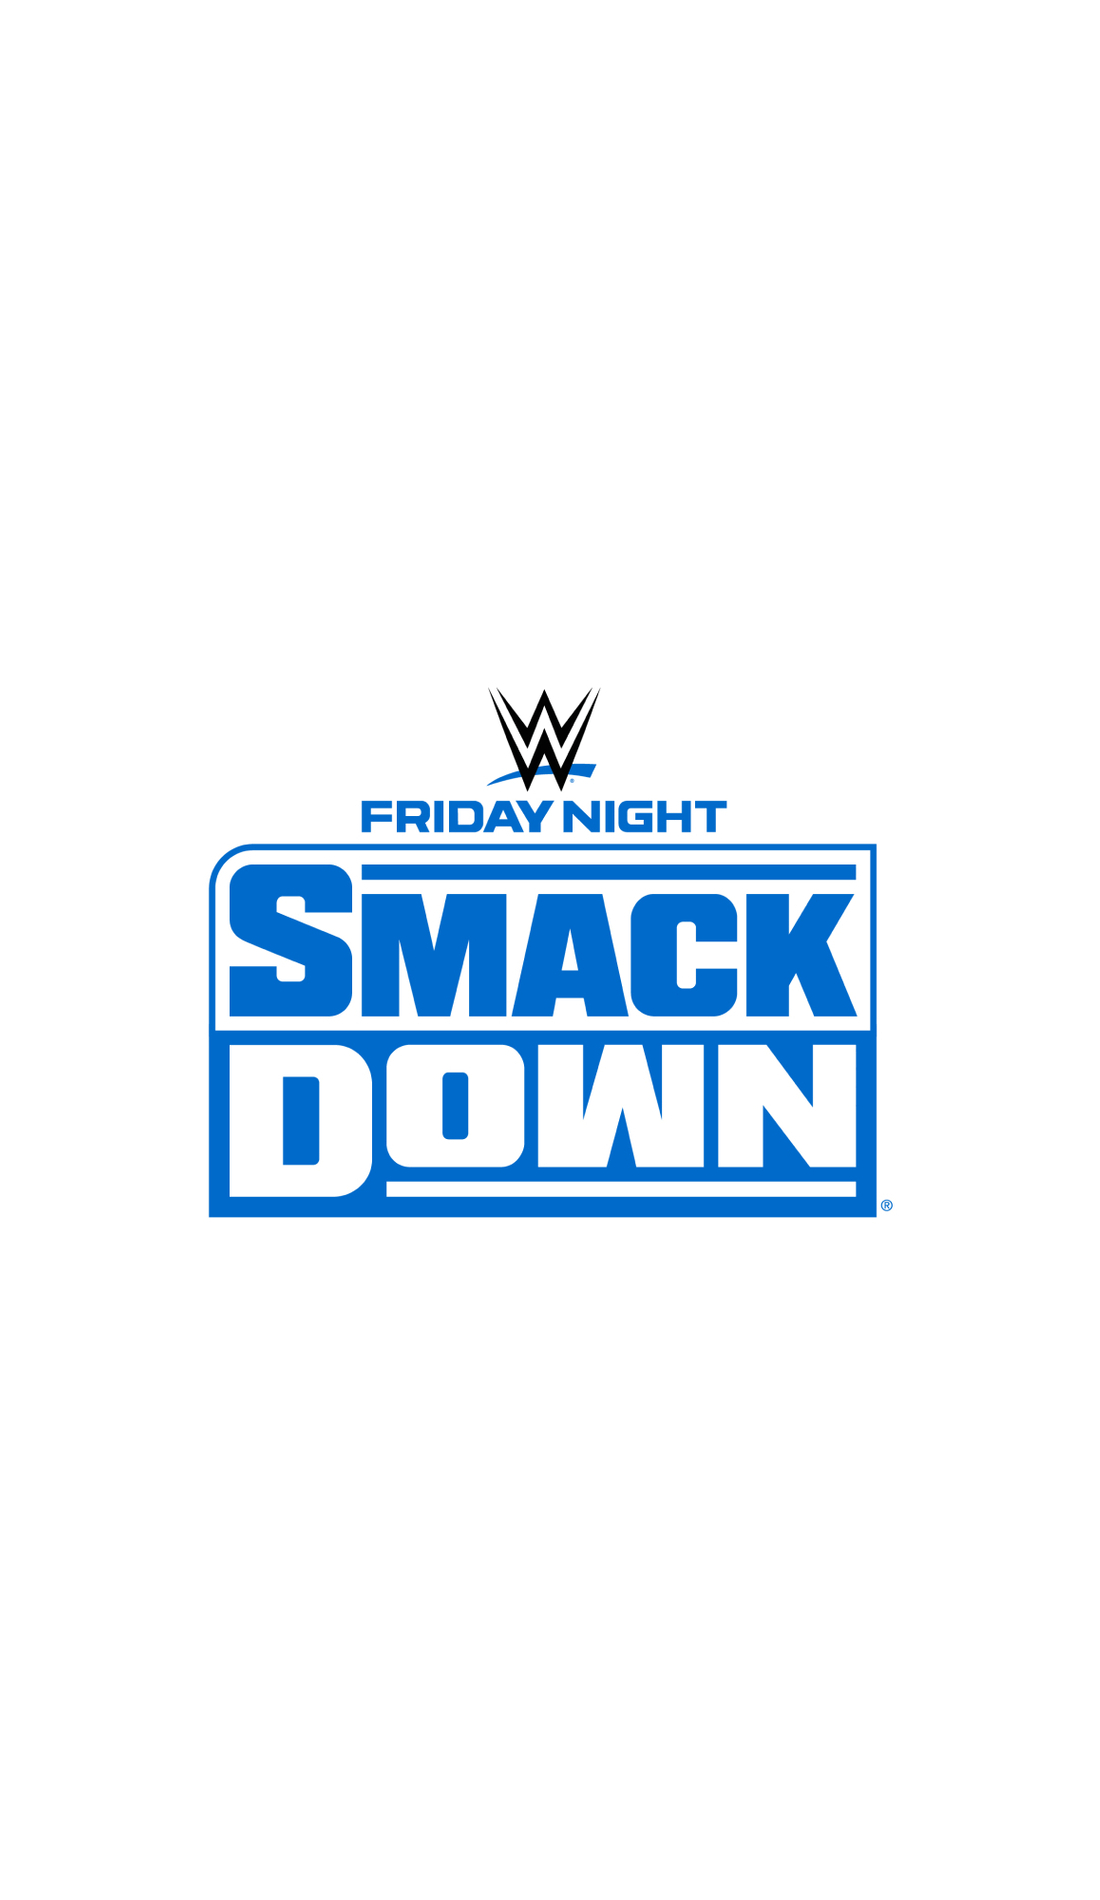 A WWE Friday Night SmackDown live event